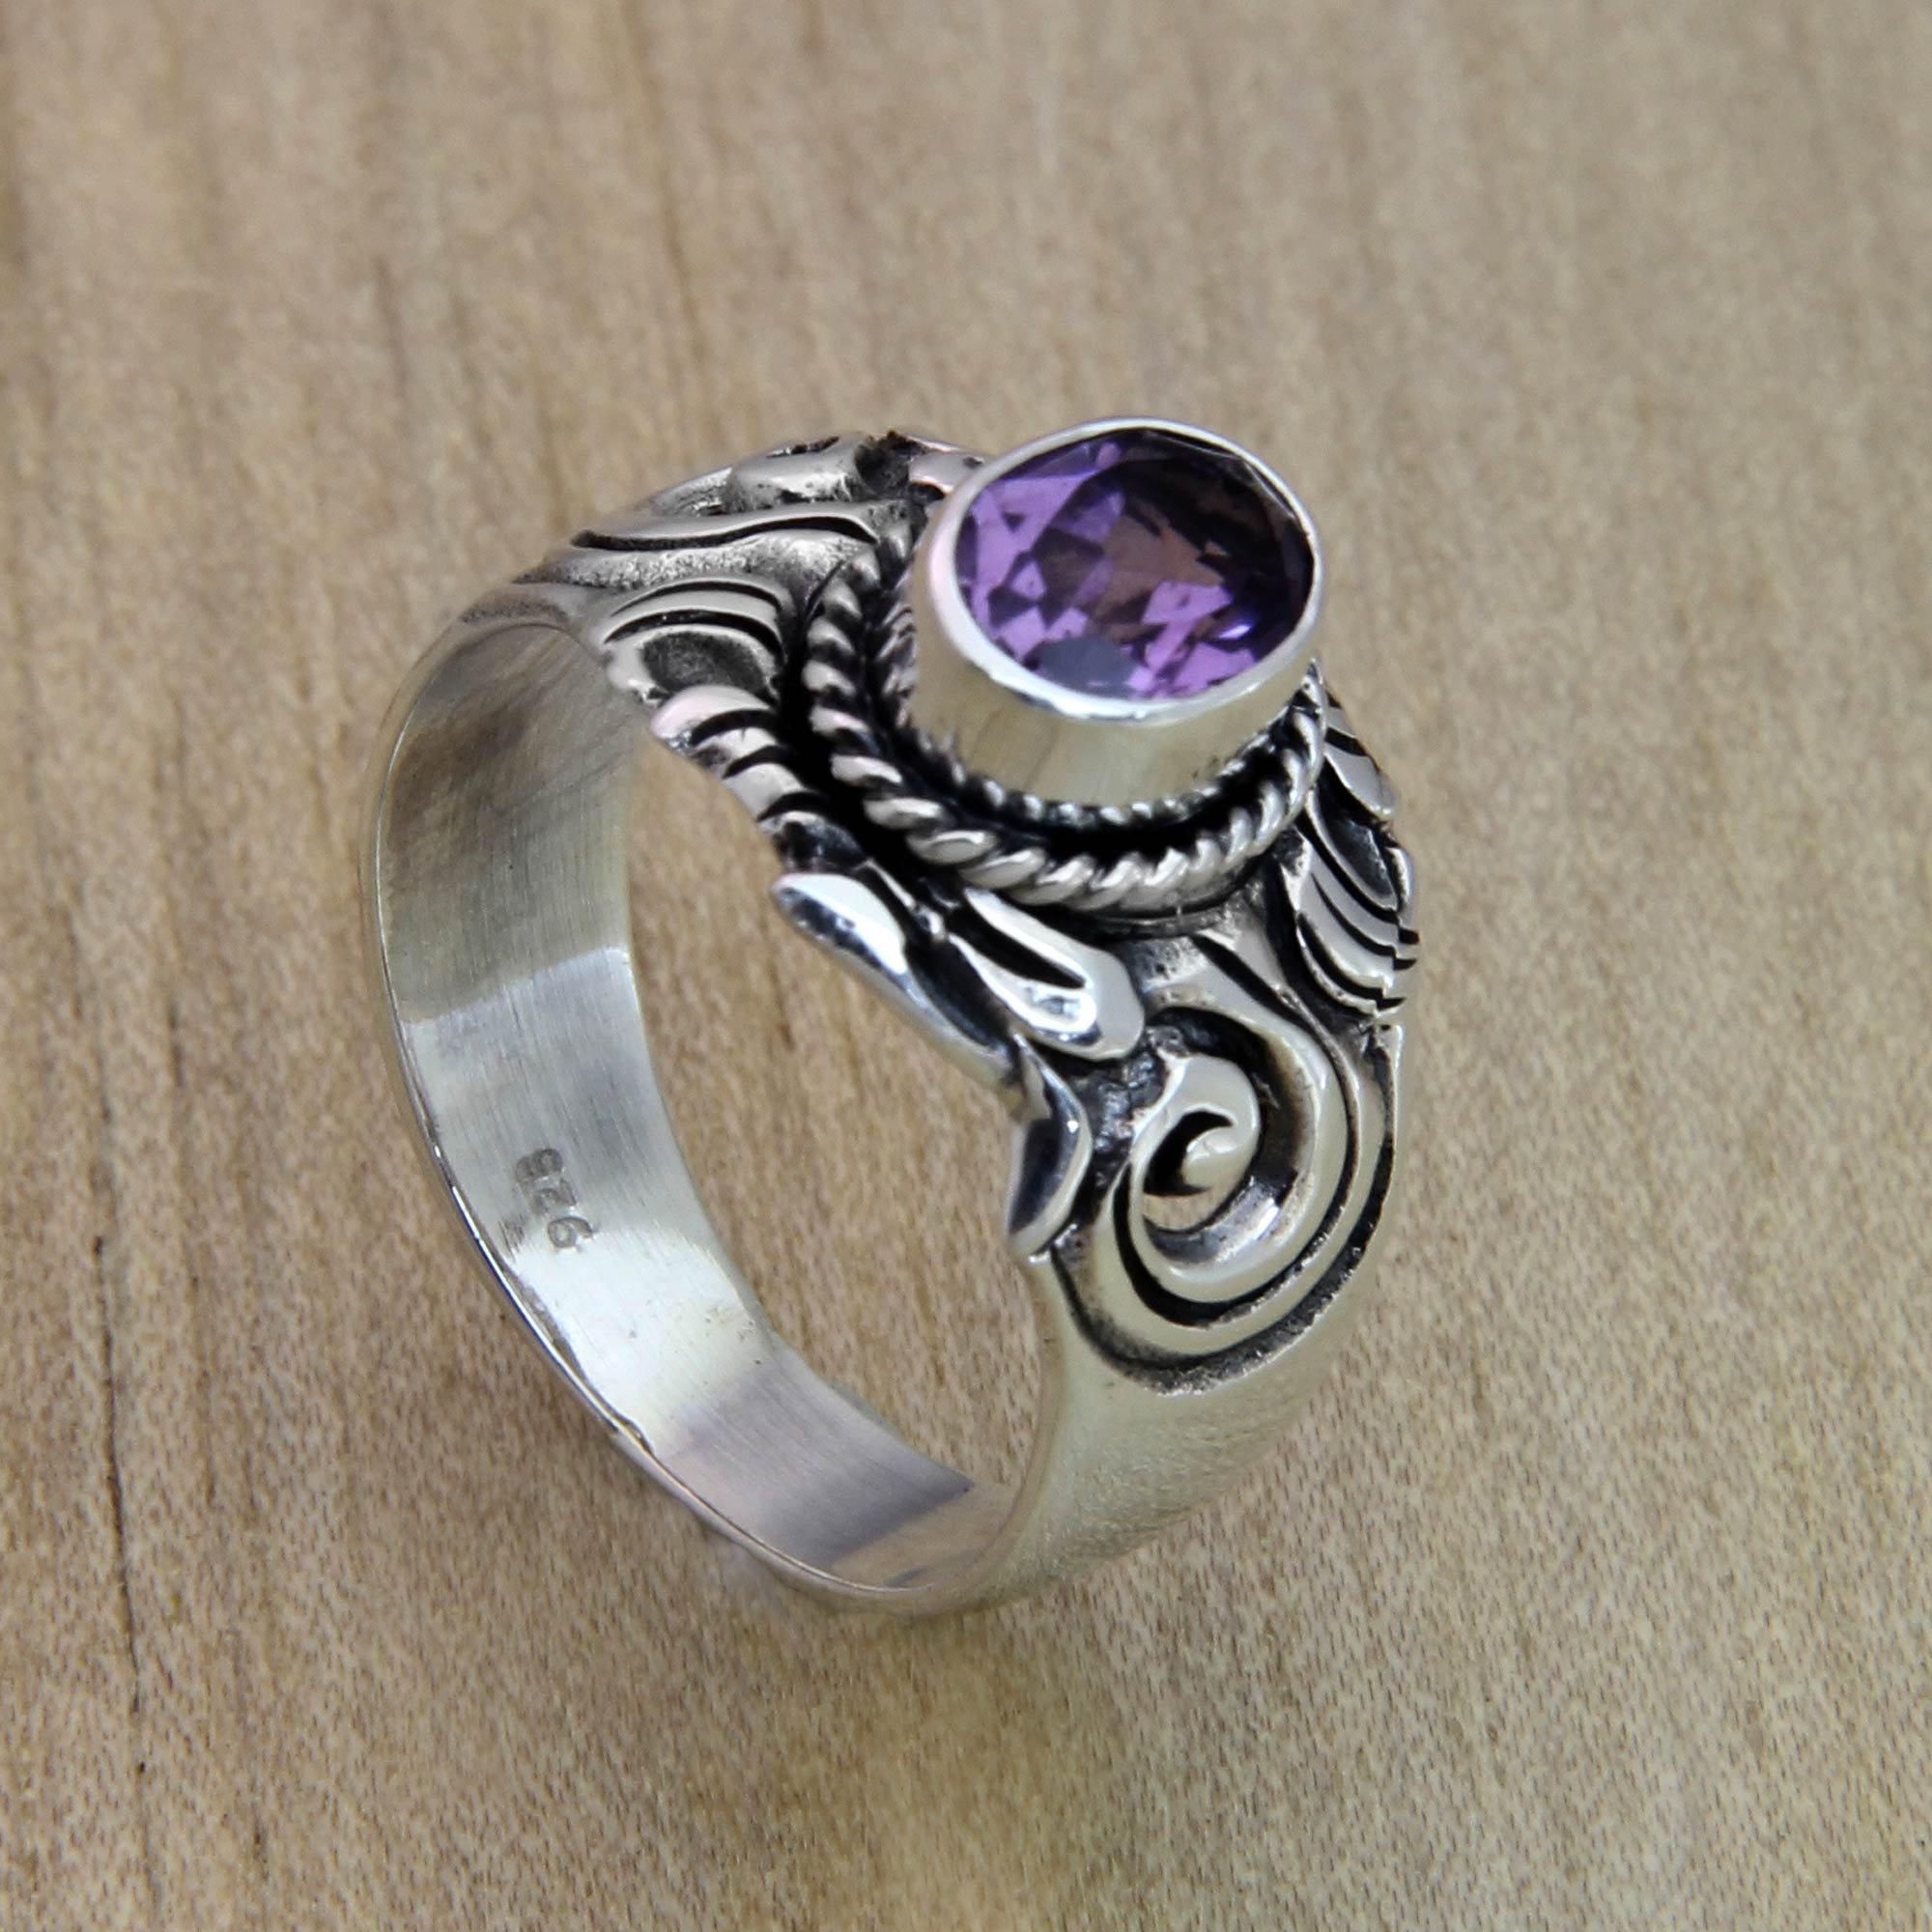 Online Solid Silver Ring With Amethyst Stone Buy Online